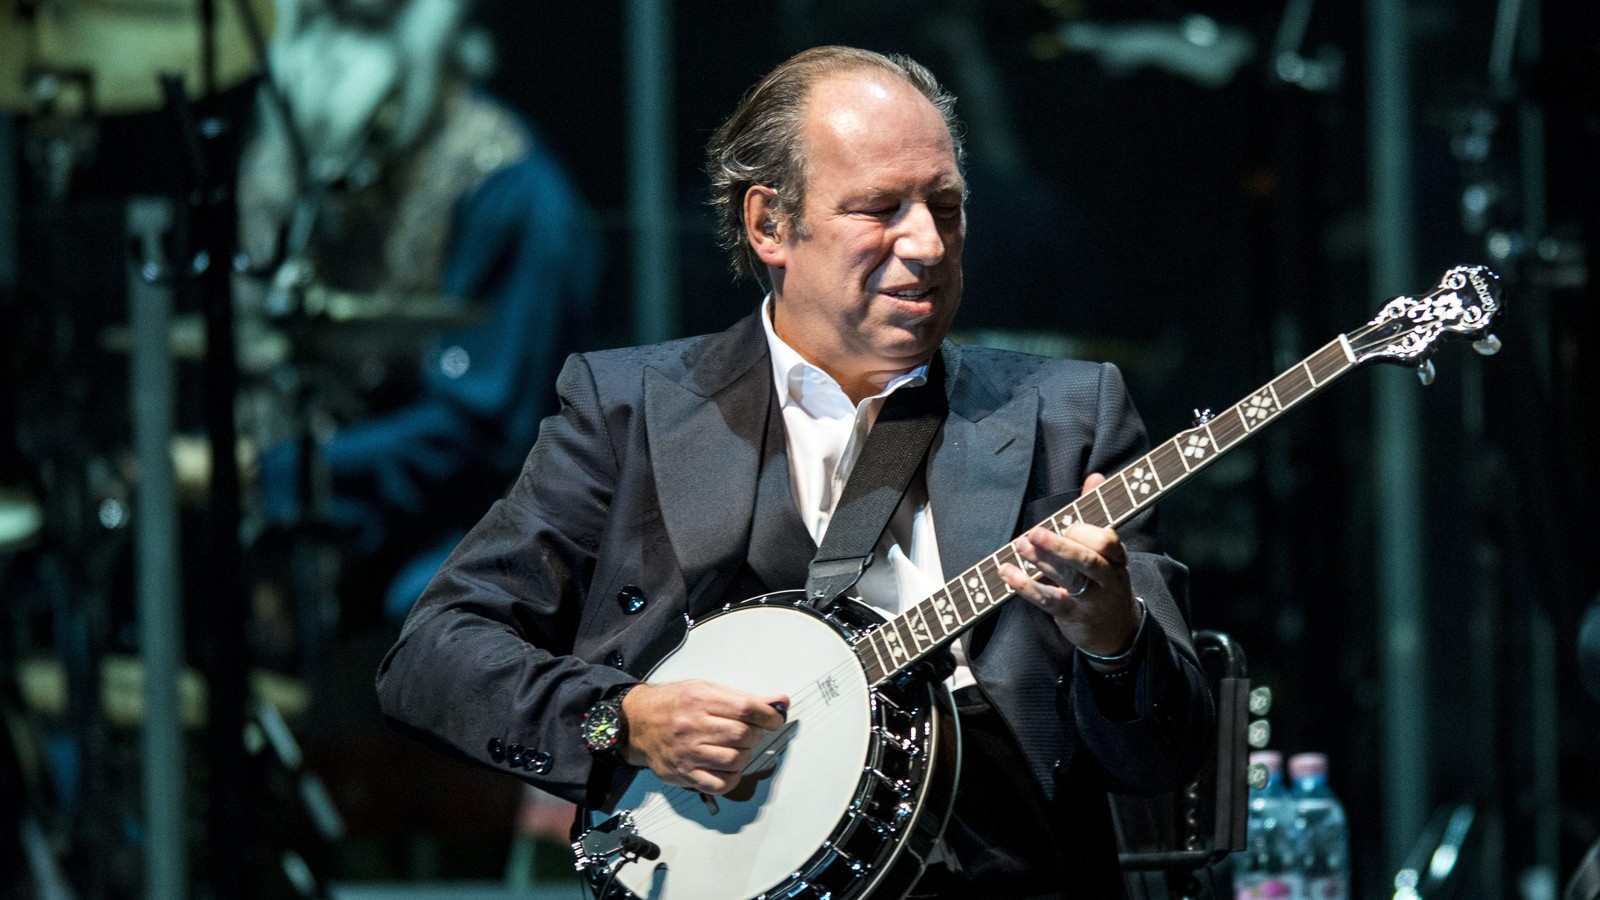 Hans Zimmer - Composer Biography, Facts and Music Compositions